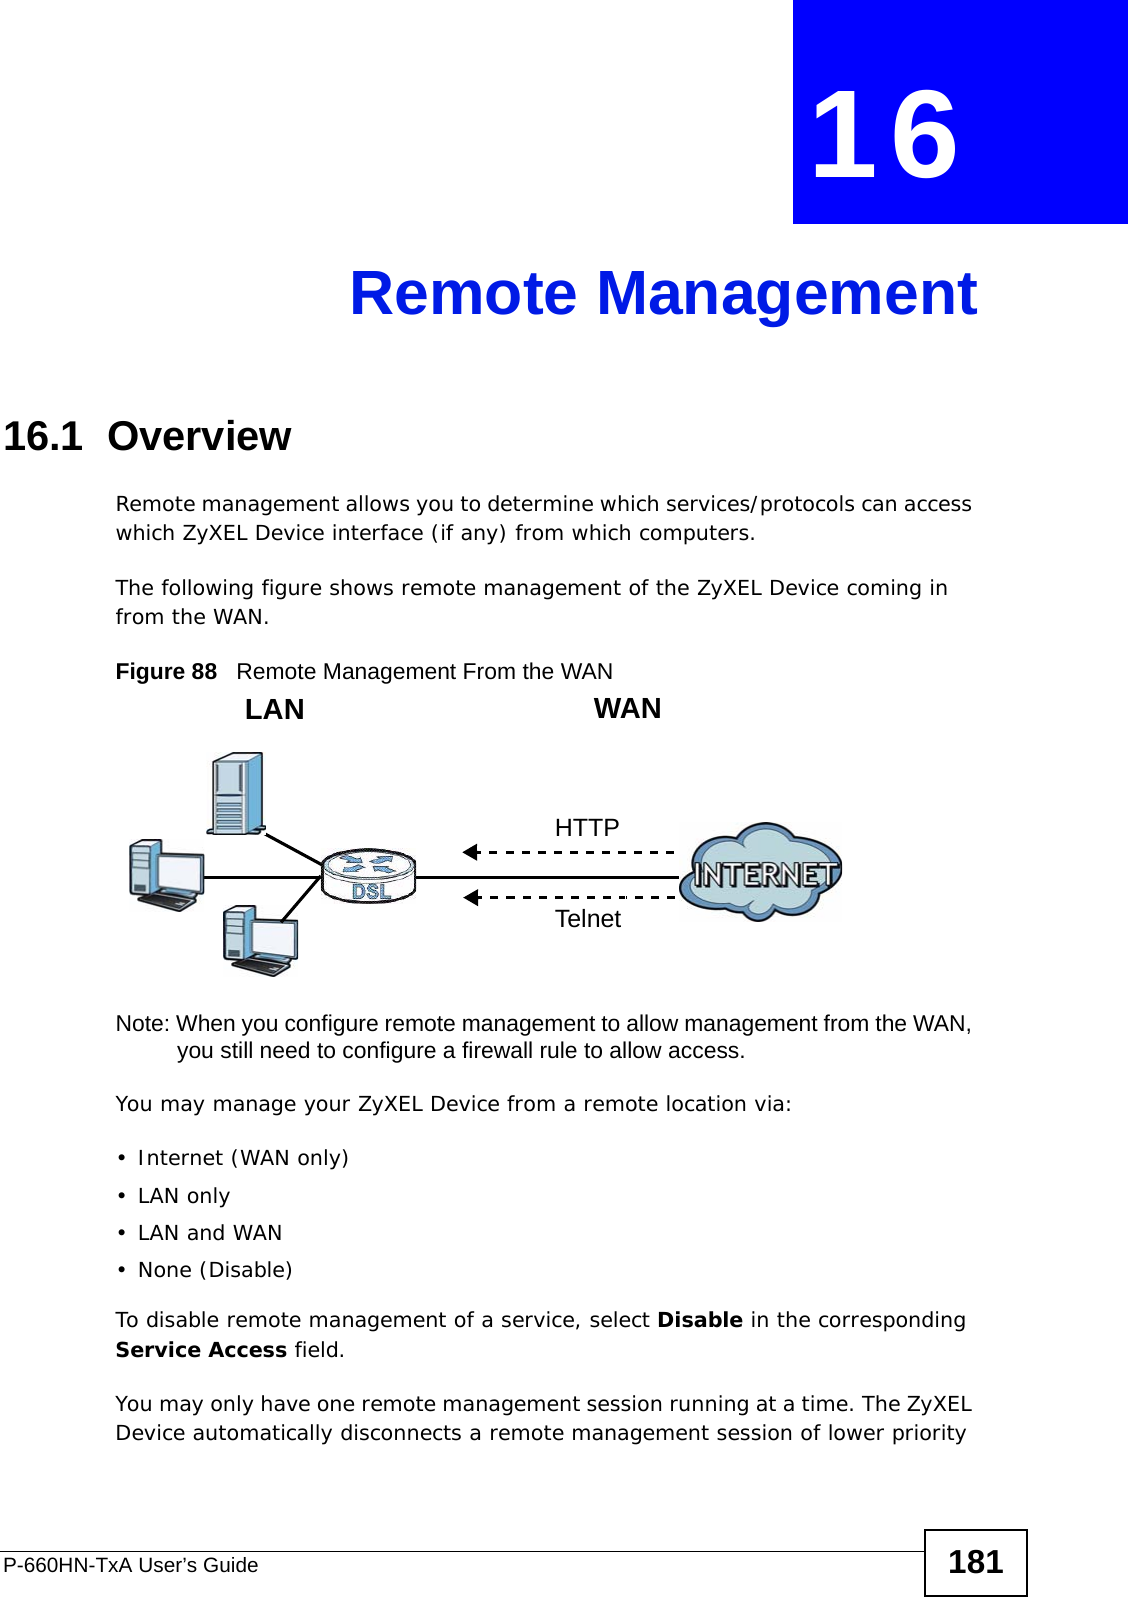 P-660HN-TxA User’s Guide 181CHAPTER  16 Remote Management16.1  OverviewRemote management allows you to determine which services/protocols can access which ZyXEL Device interface (if any) from which computers.The following figure shows remote management of the ZyXEL Device coming in from the WAN.Figure 88   Remote Management From the WANNote: When you configure remote management to allow management from the WAN, you still need to configure a firewall rule to allow access.You may manage your ZyXEL Device from a remote location via:•Internet (WAN only)•LAN only•LAN and WAN• None (Disable)To disable remote management of a service, select Disable in the corresponding Service Access field.You may only have one remote management session running at a time. The ZyXEL Device automatically disconnects a remote management session of lower priority LAN WANHTTPTelnet